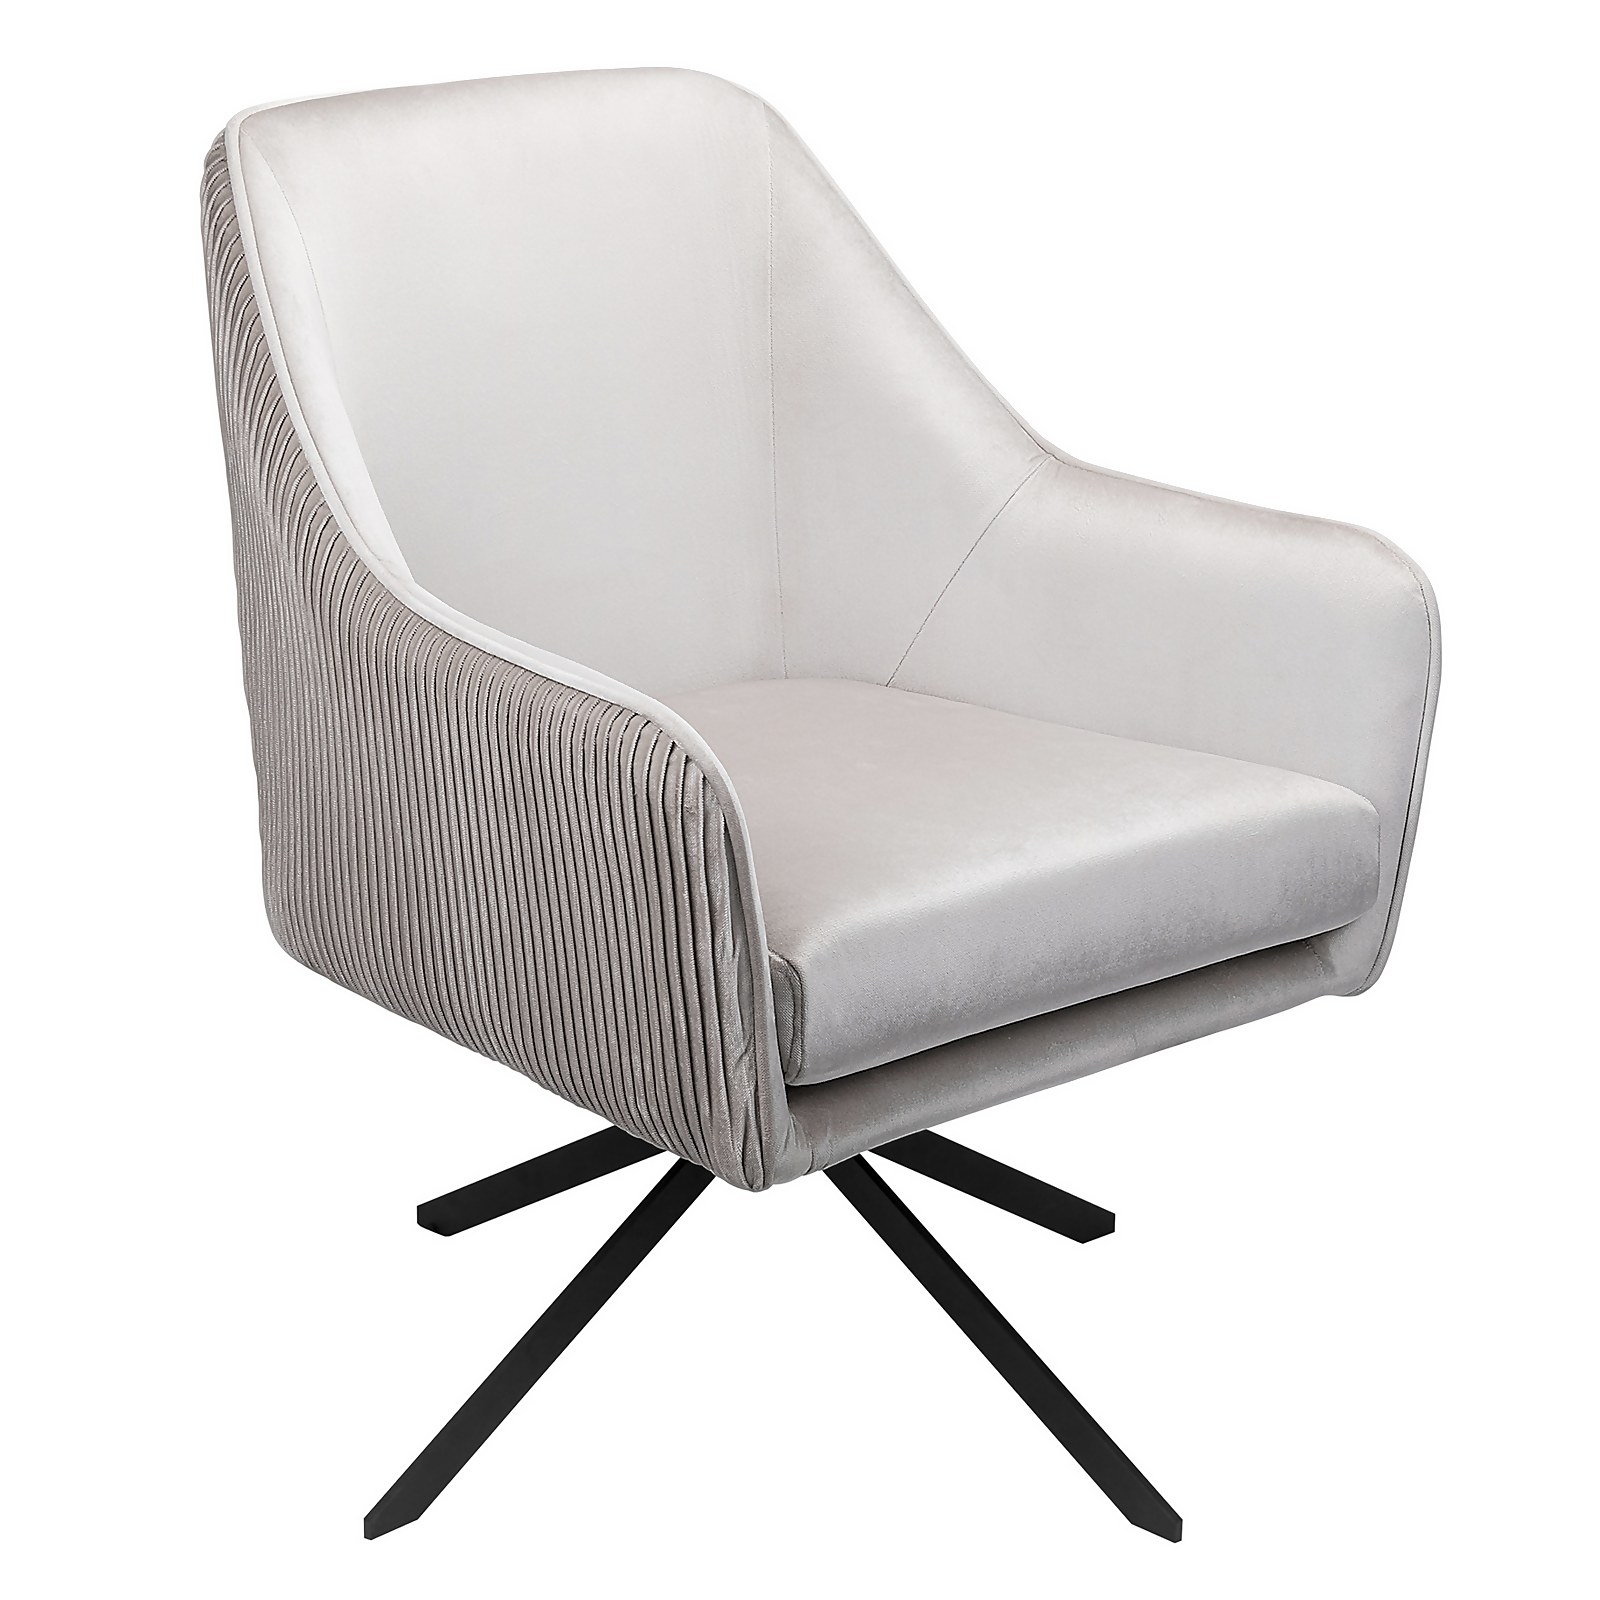 Photo of Pia Pleat Swivel Chair - Silver